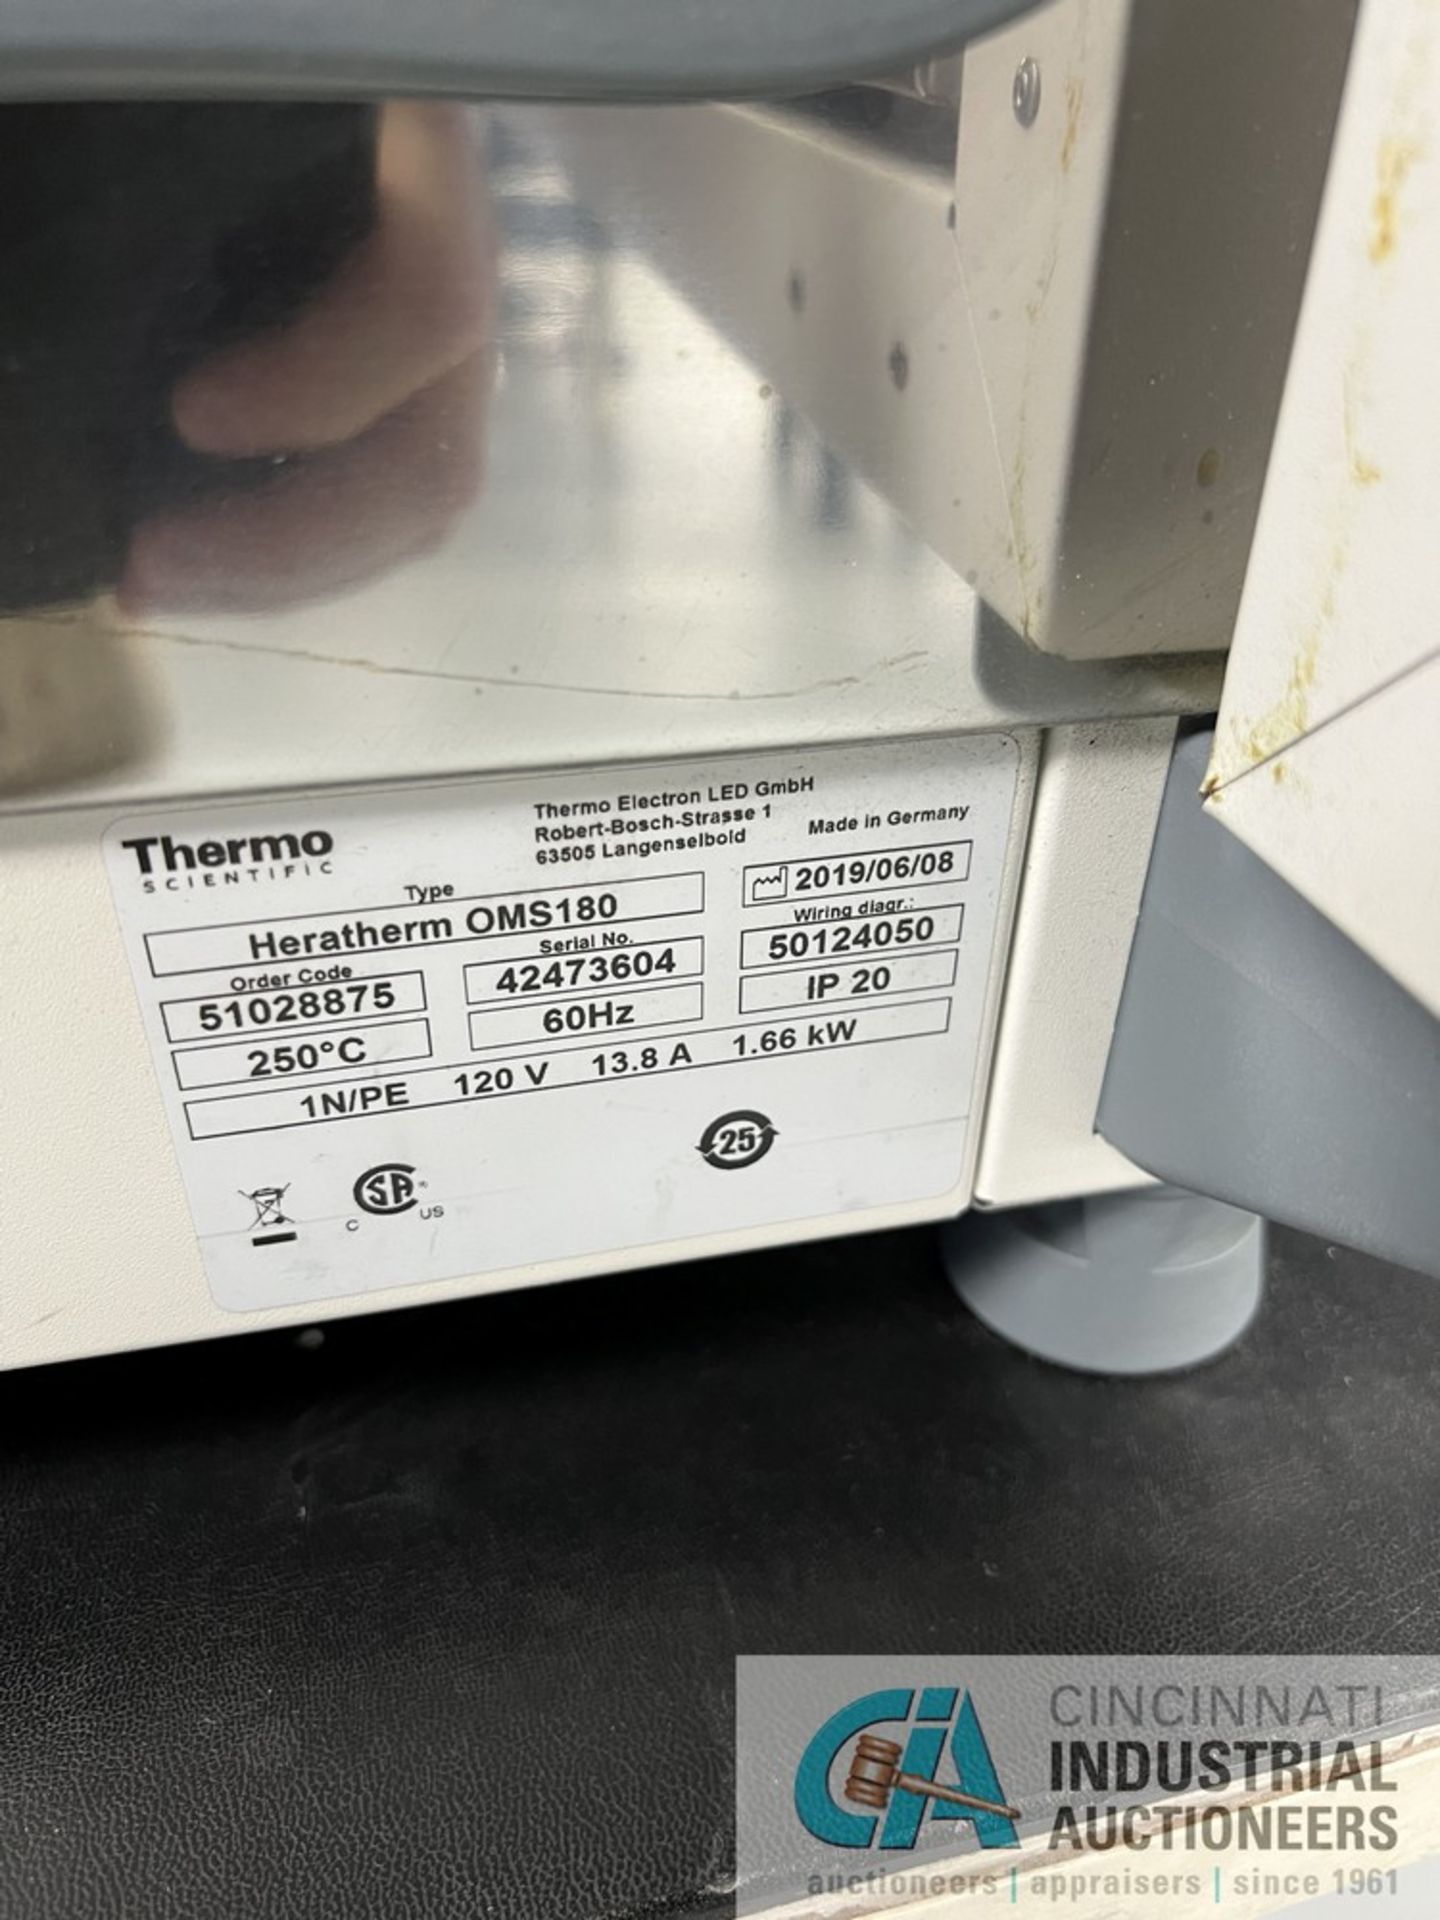 THERMO SCIENTIFIC MODEL HERATHERM OMS180 INDUSTRIAL OVEN; S/N 42473604, 20" X 20" X 28" CHAMBER ( - Image 4 of 4